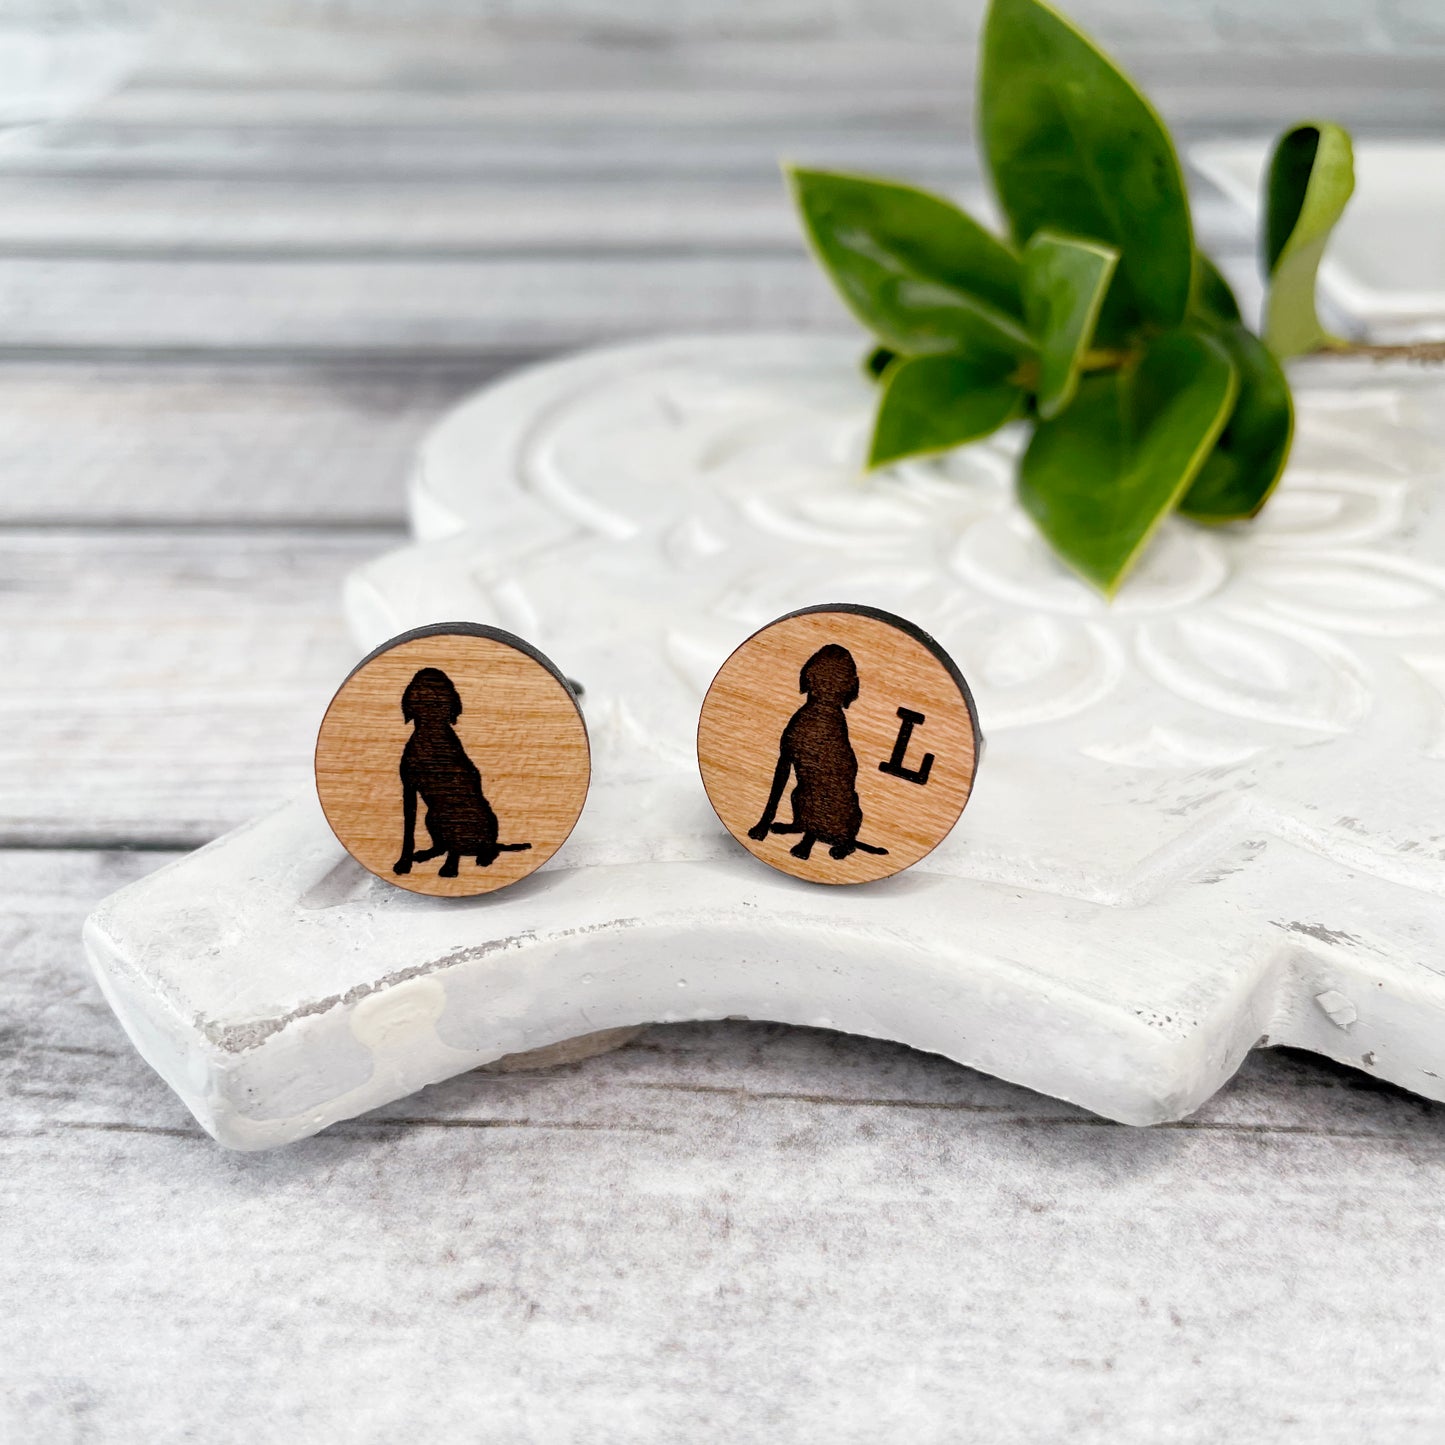 Engraved wooden cufflinks with a Vizsla silhouette